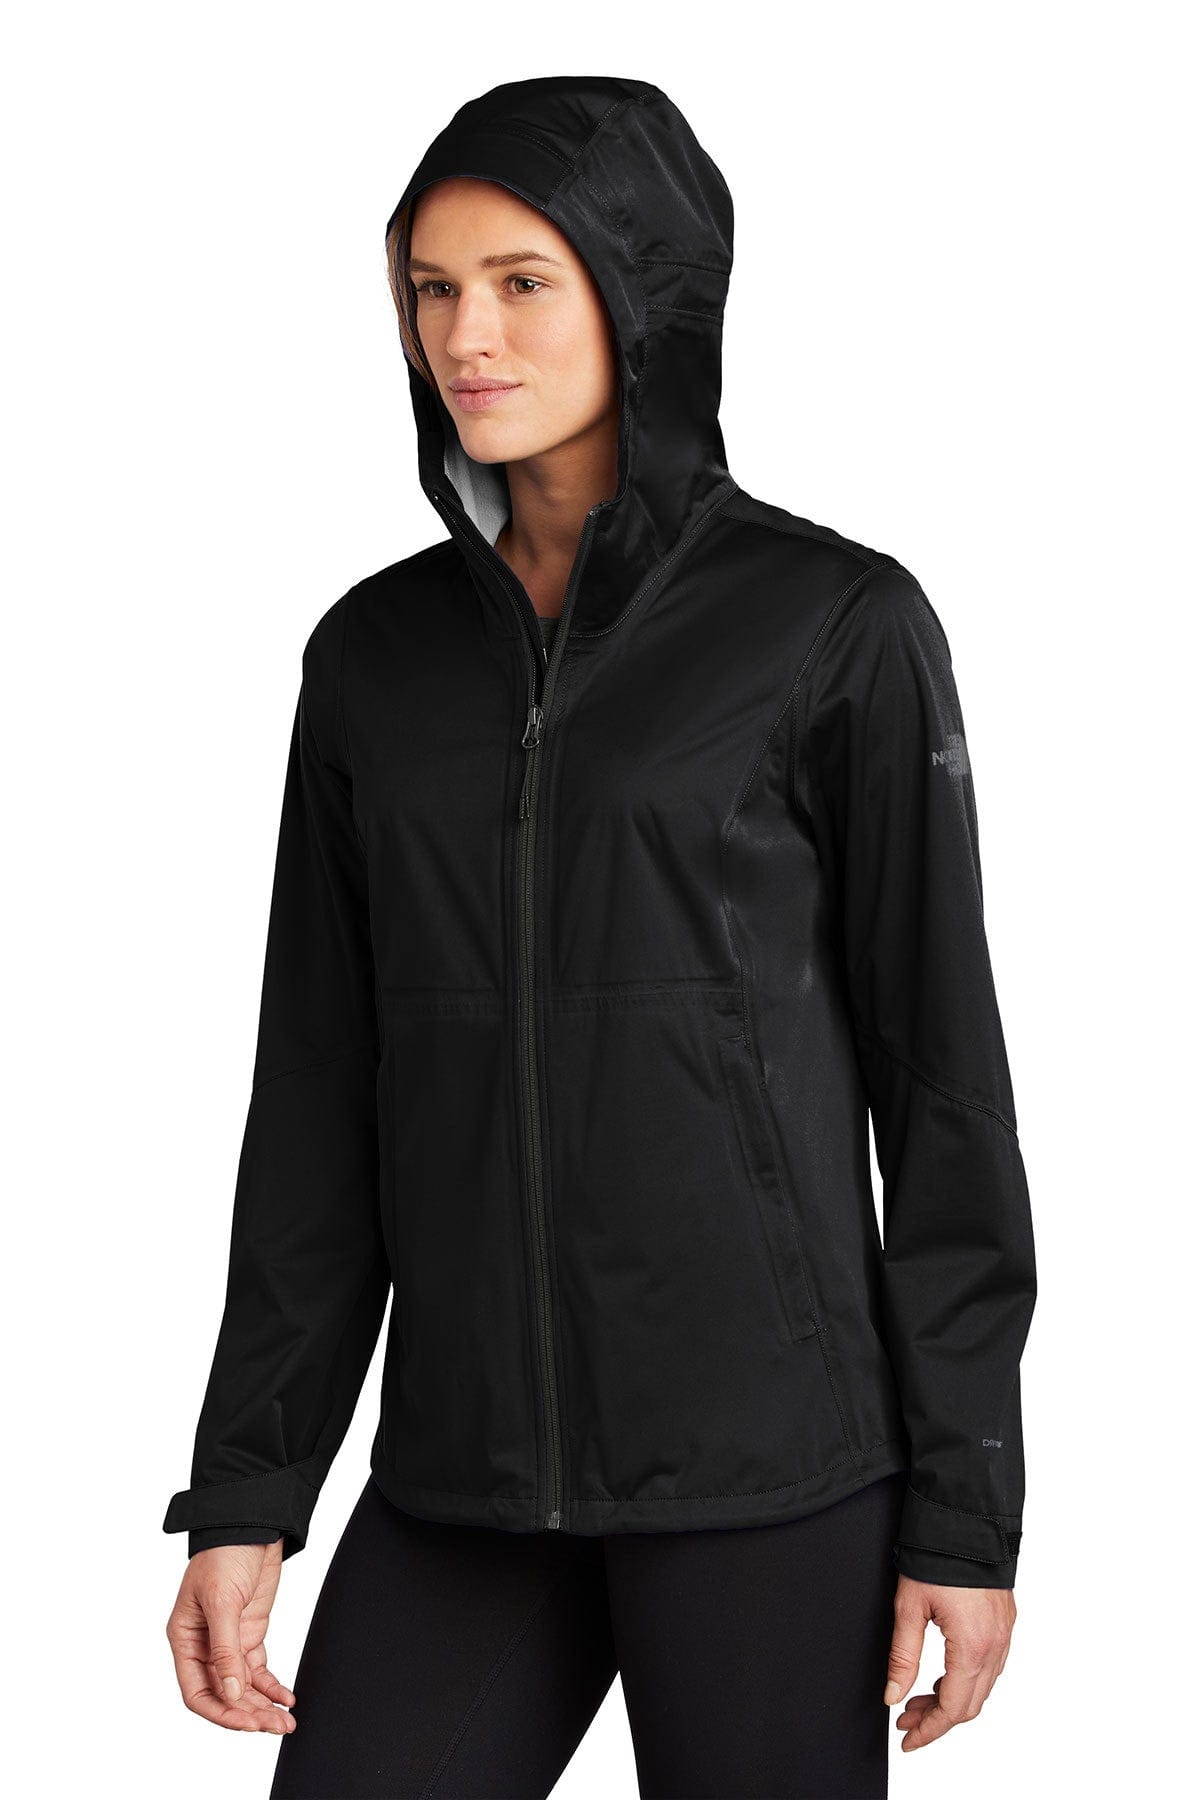 Custom The North Face Ladies DryVent Stretch Jacket